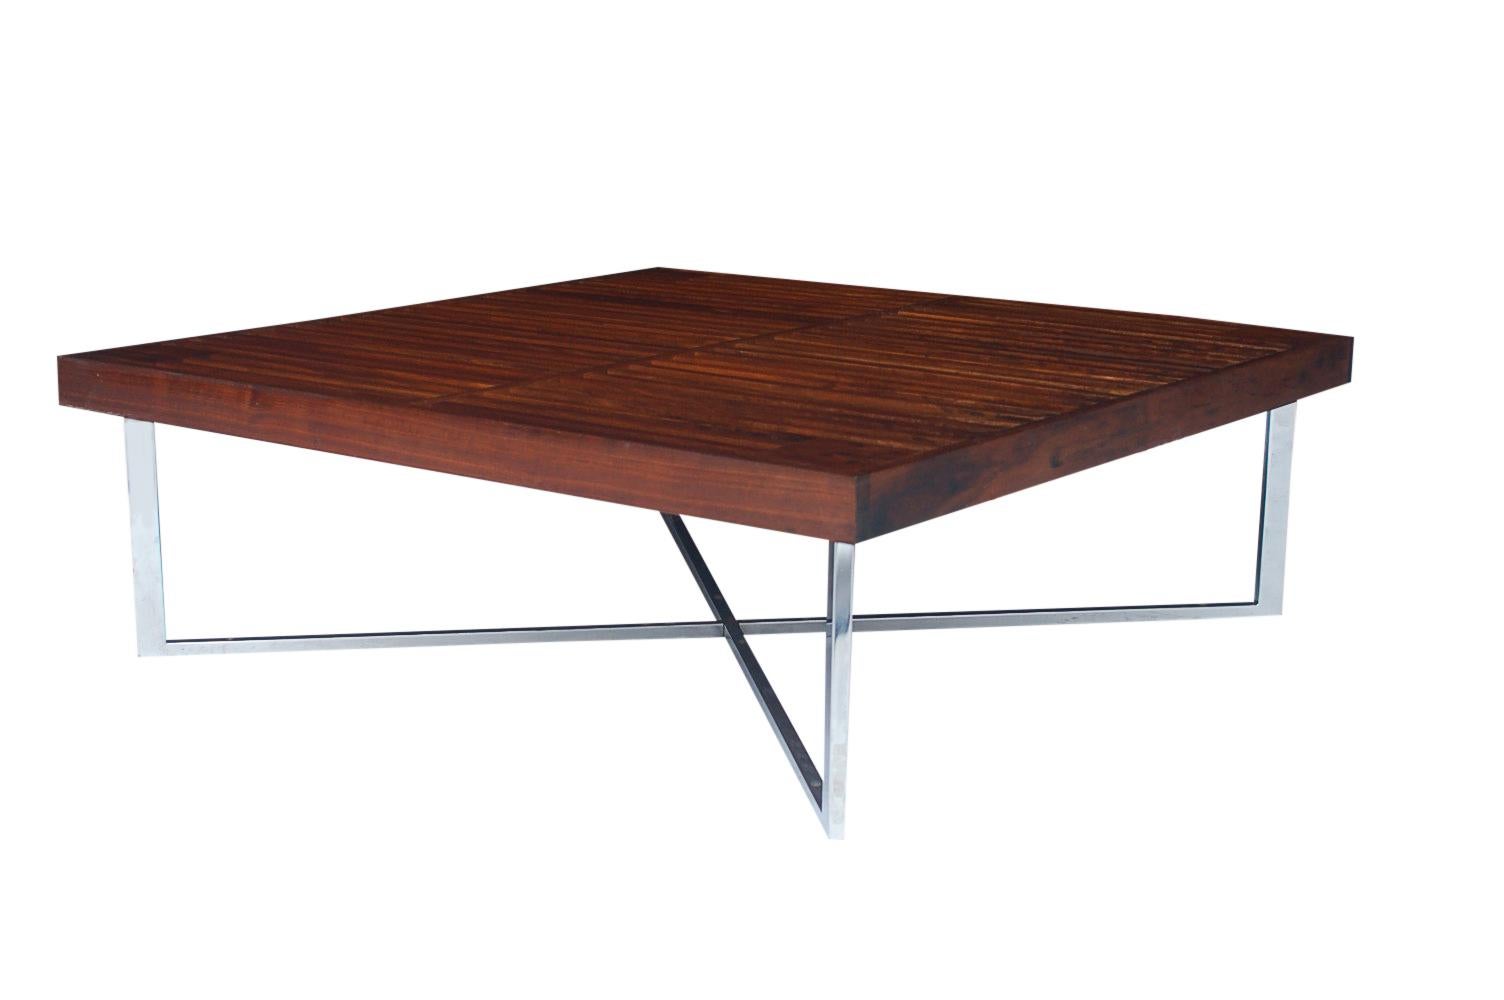 Late 20th Century Mid-Century Modern Square Slat Wood Cocktail Table with X-Base after Nelson For Sale